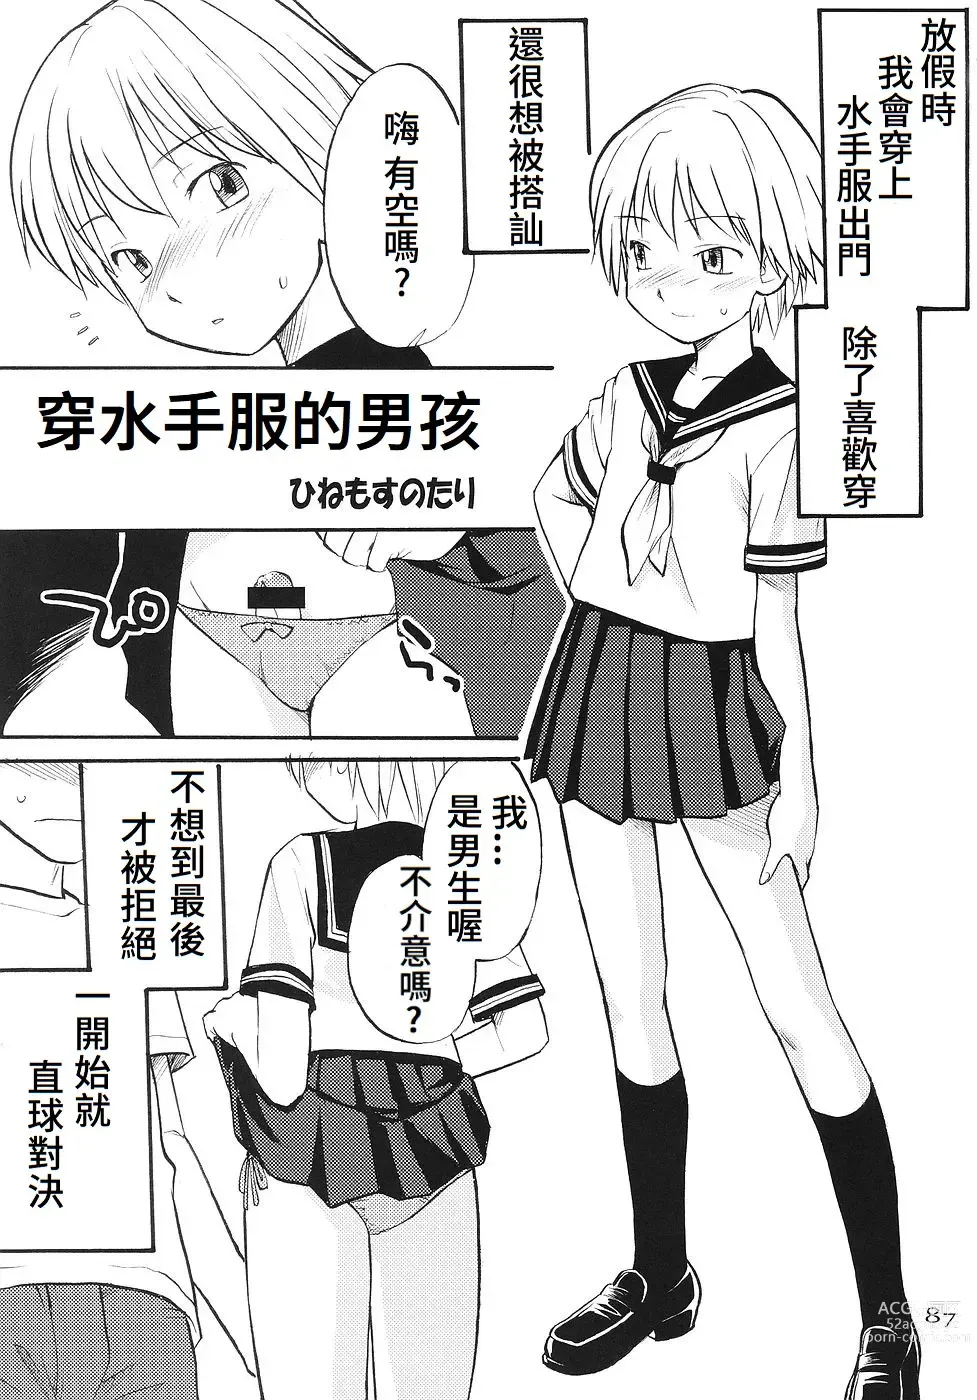 Page 1 of doujinshi Boy with the Sailor Suit